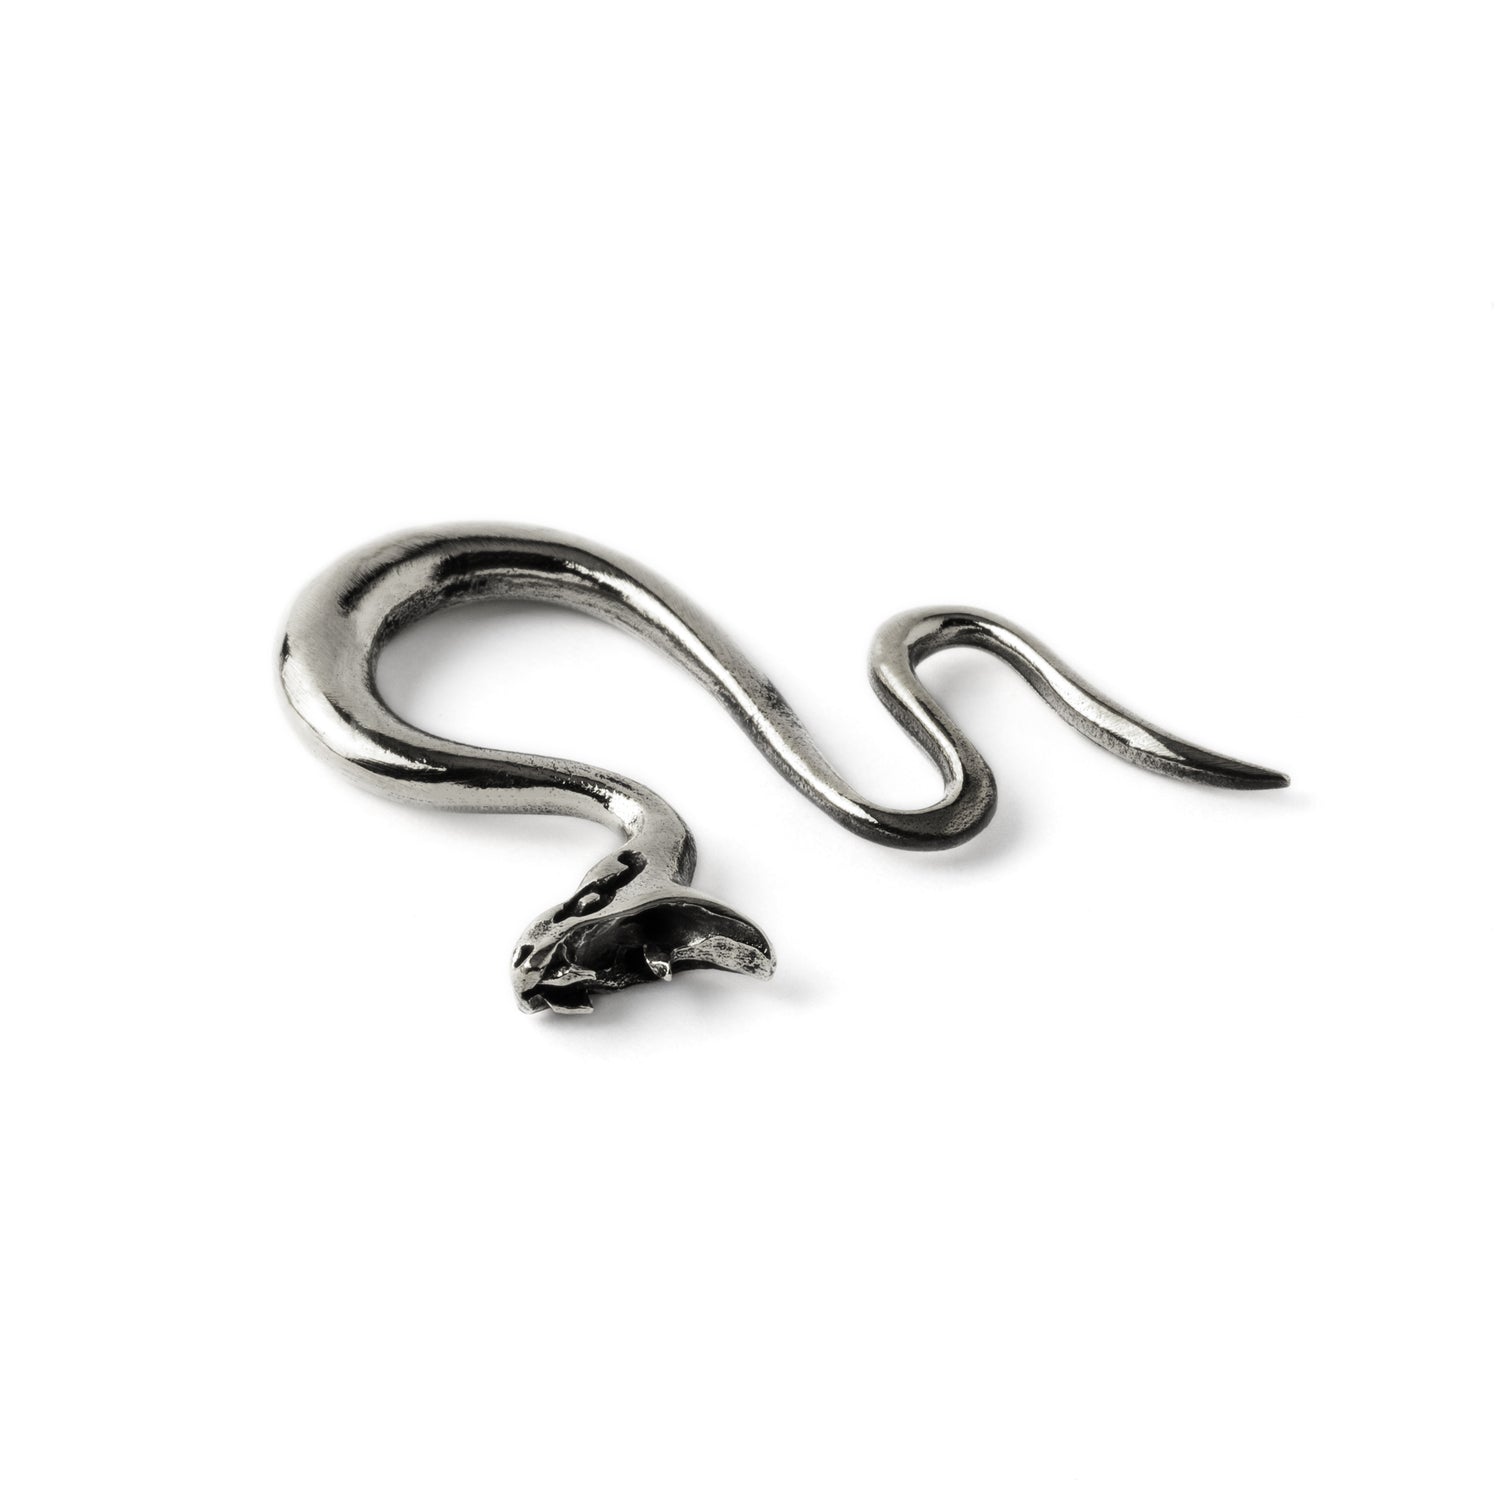 single silver brass serpent ear hangers stretchers for stretched ears frontal view